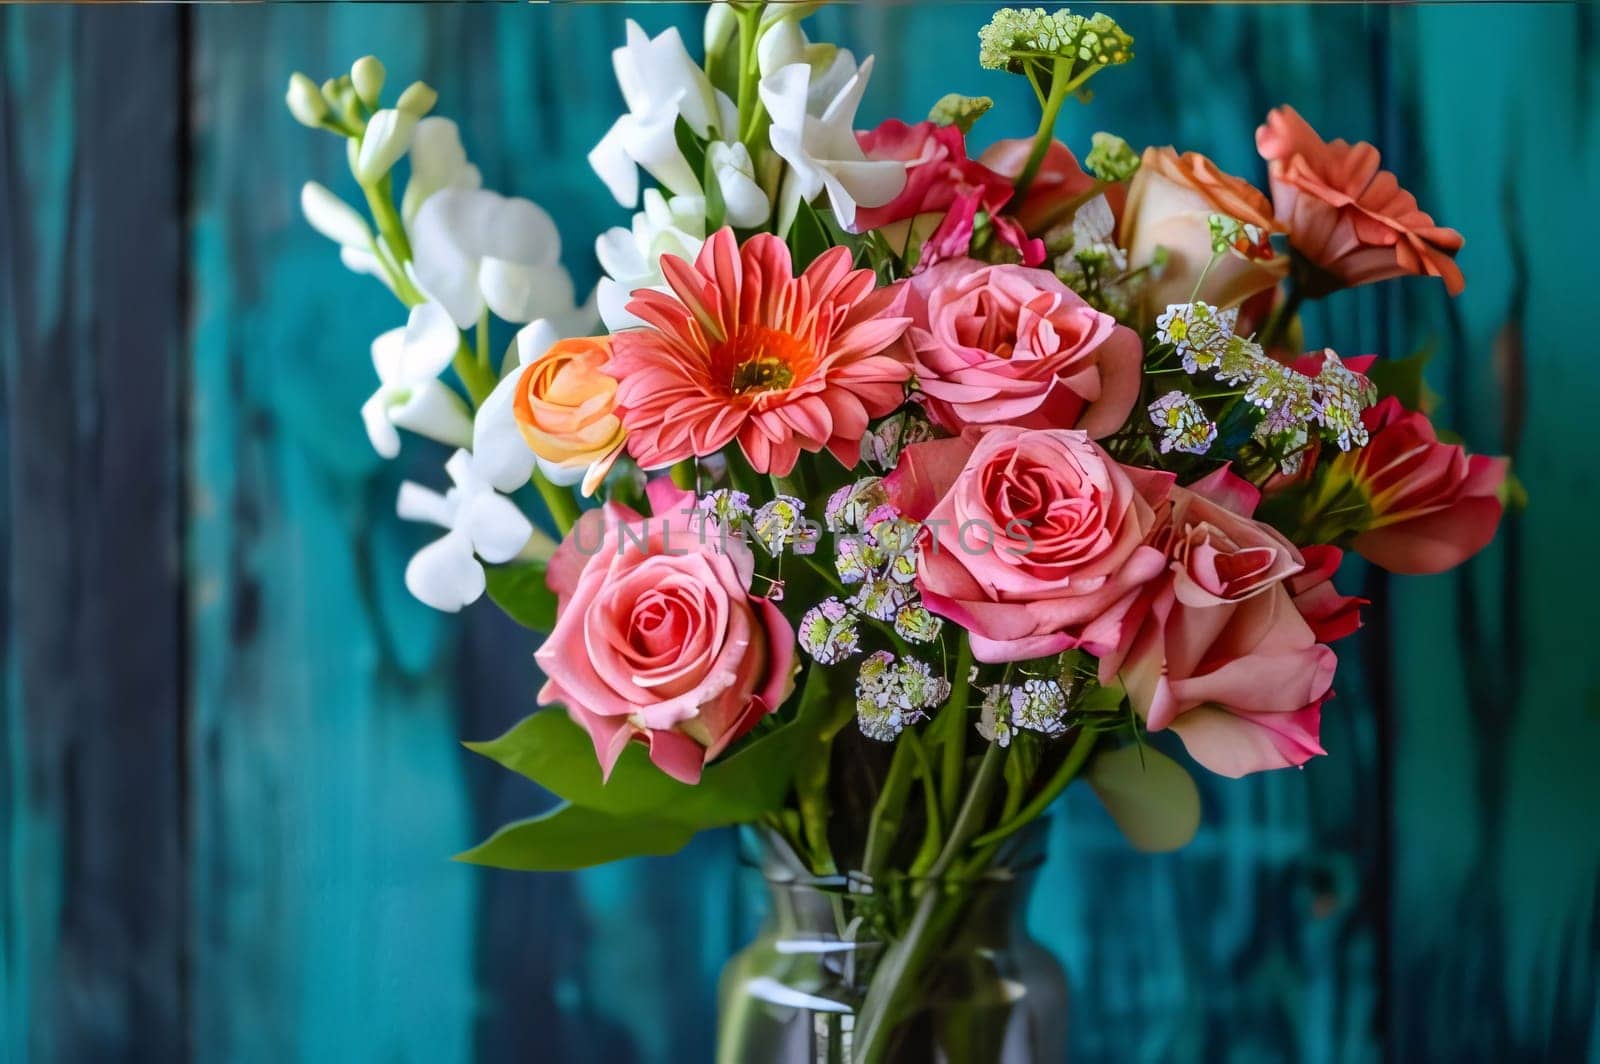 Bouquet of roses, flowers in a glass vase on a wooden background. Flowering flowers, a symbol of spring, new life. A joyful time of nature waking up to life.